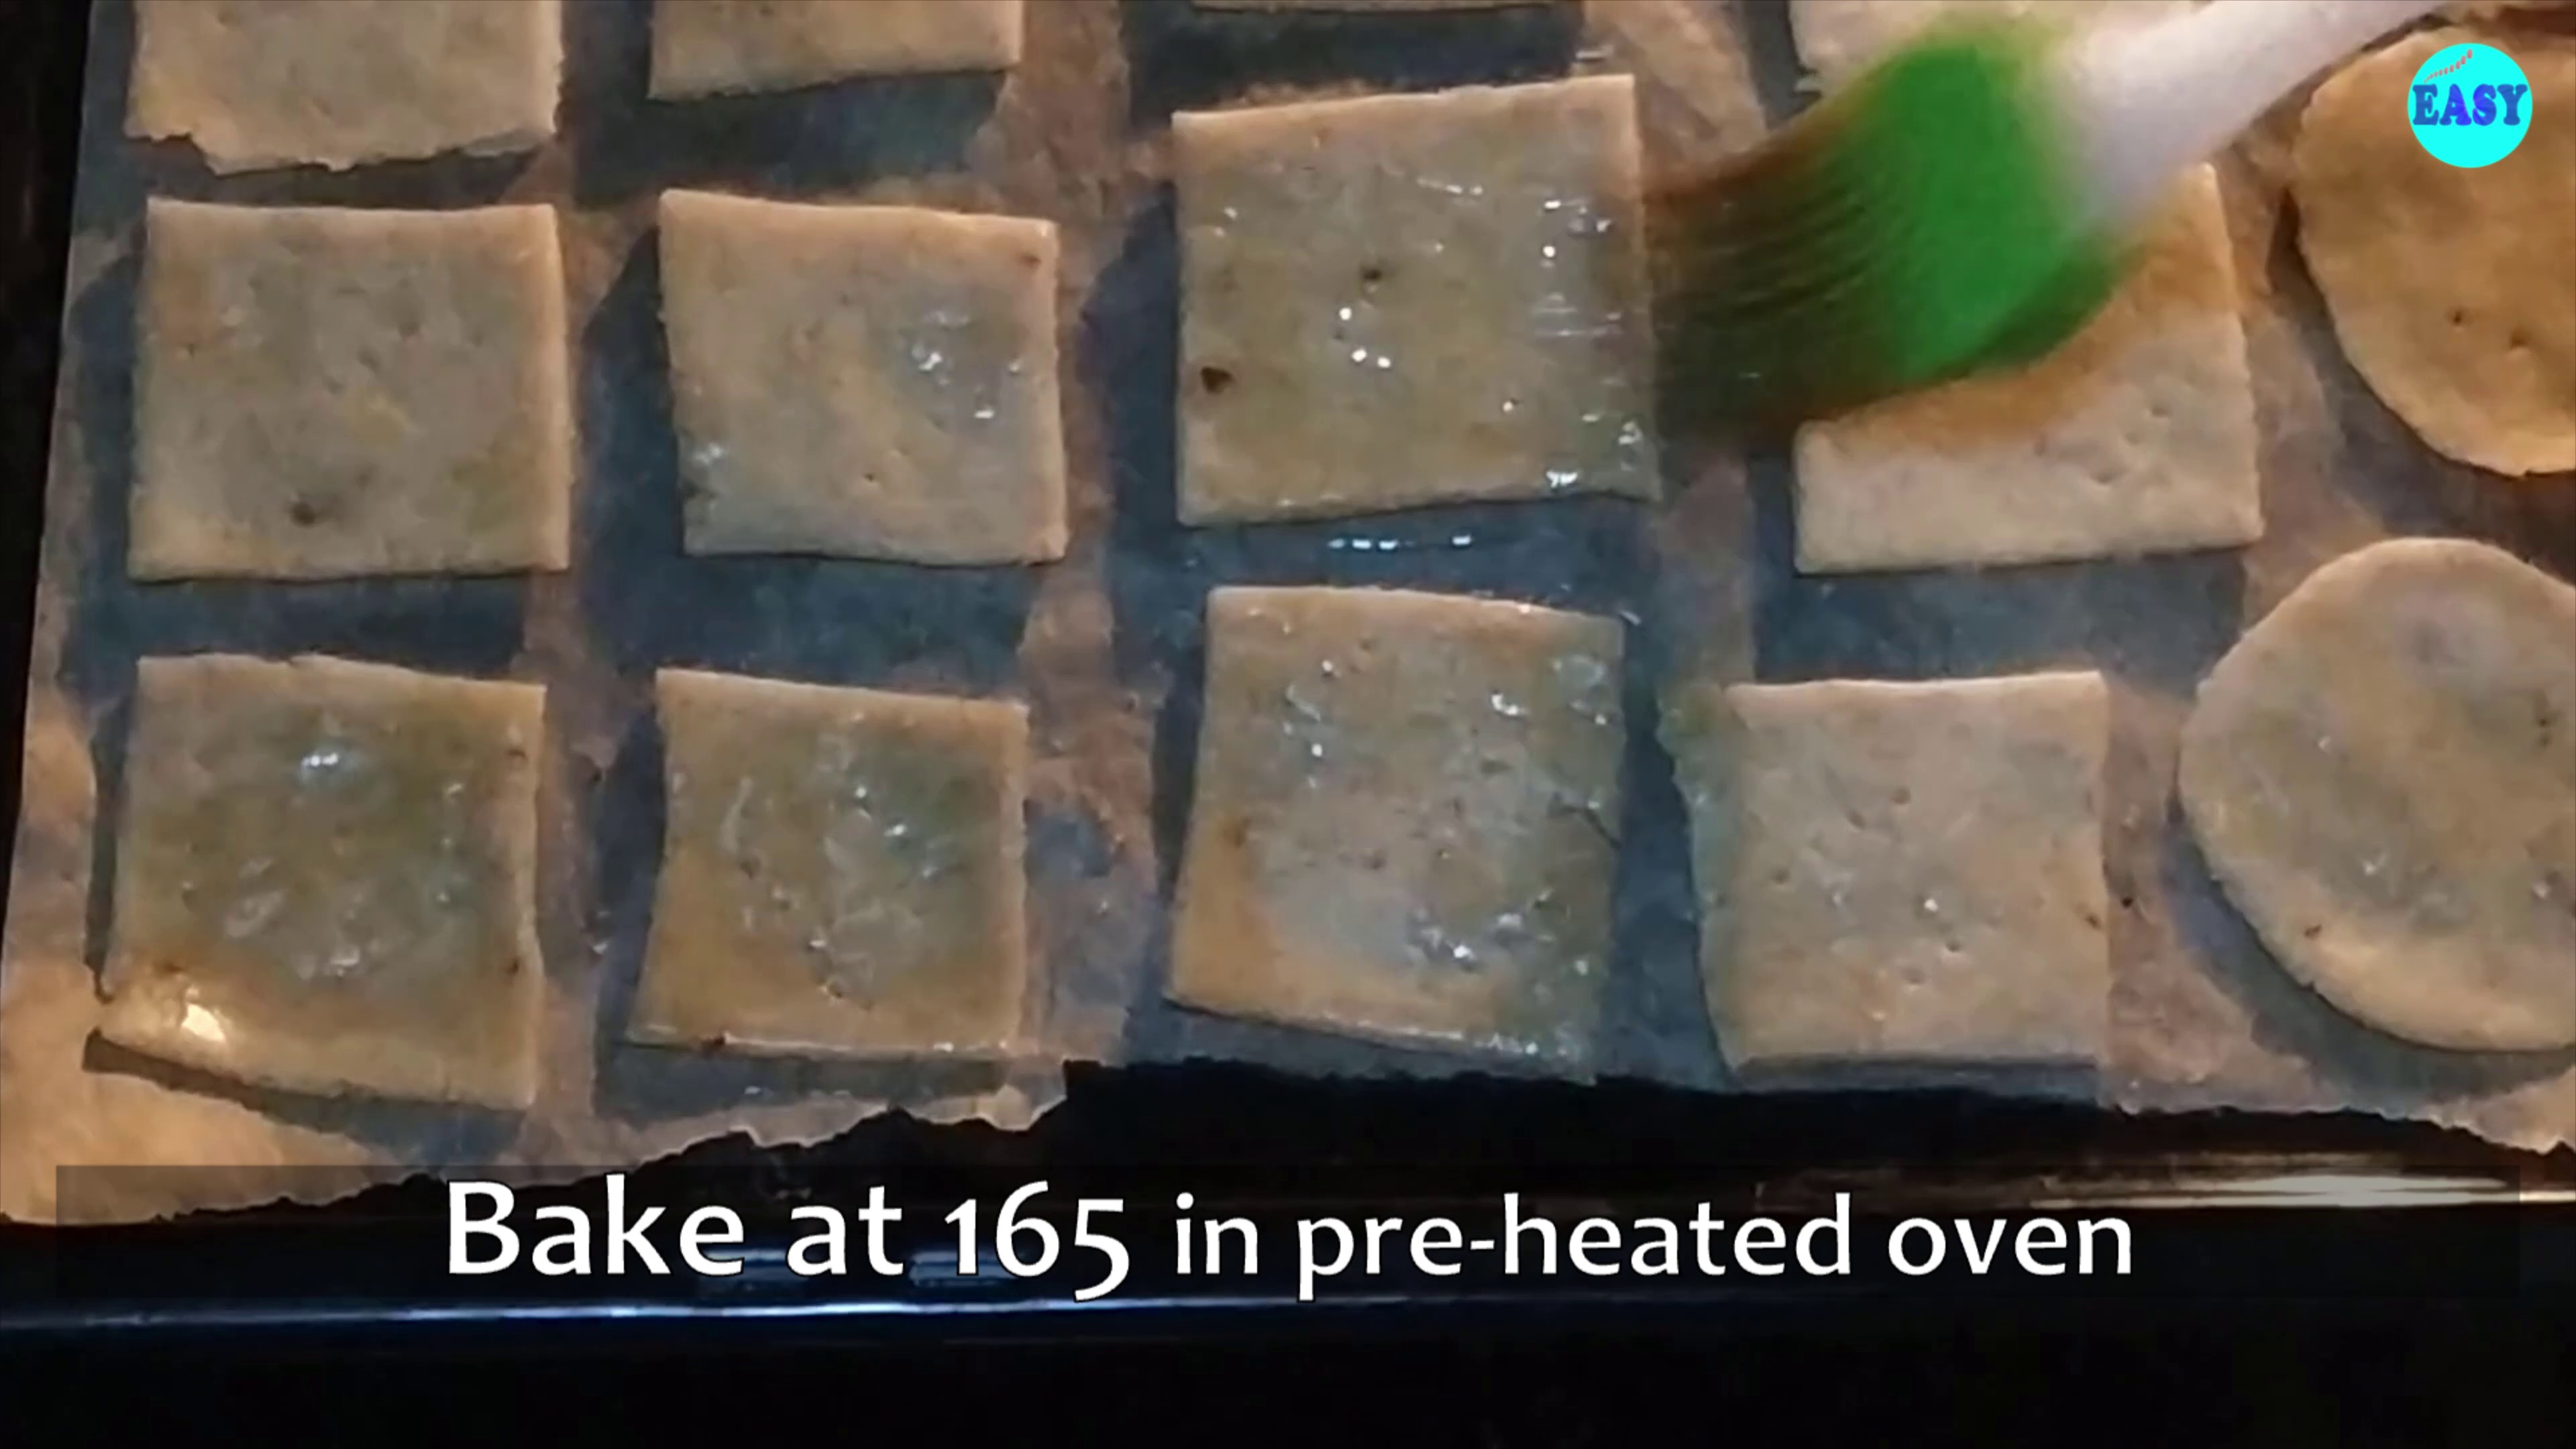 Step 11 - Brush with some oil and bake in a preheated oven at 1650c for 10 – 15 minutes.